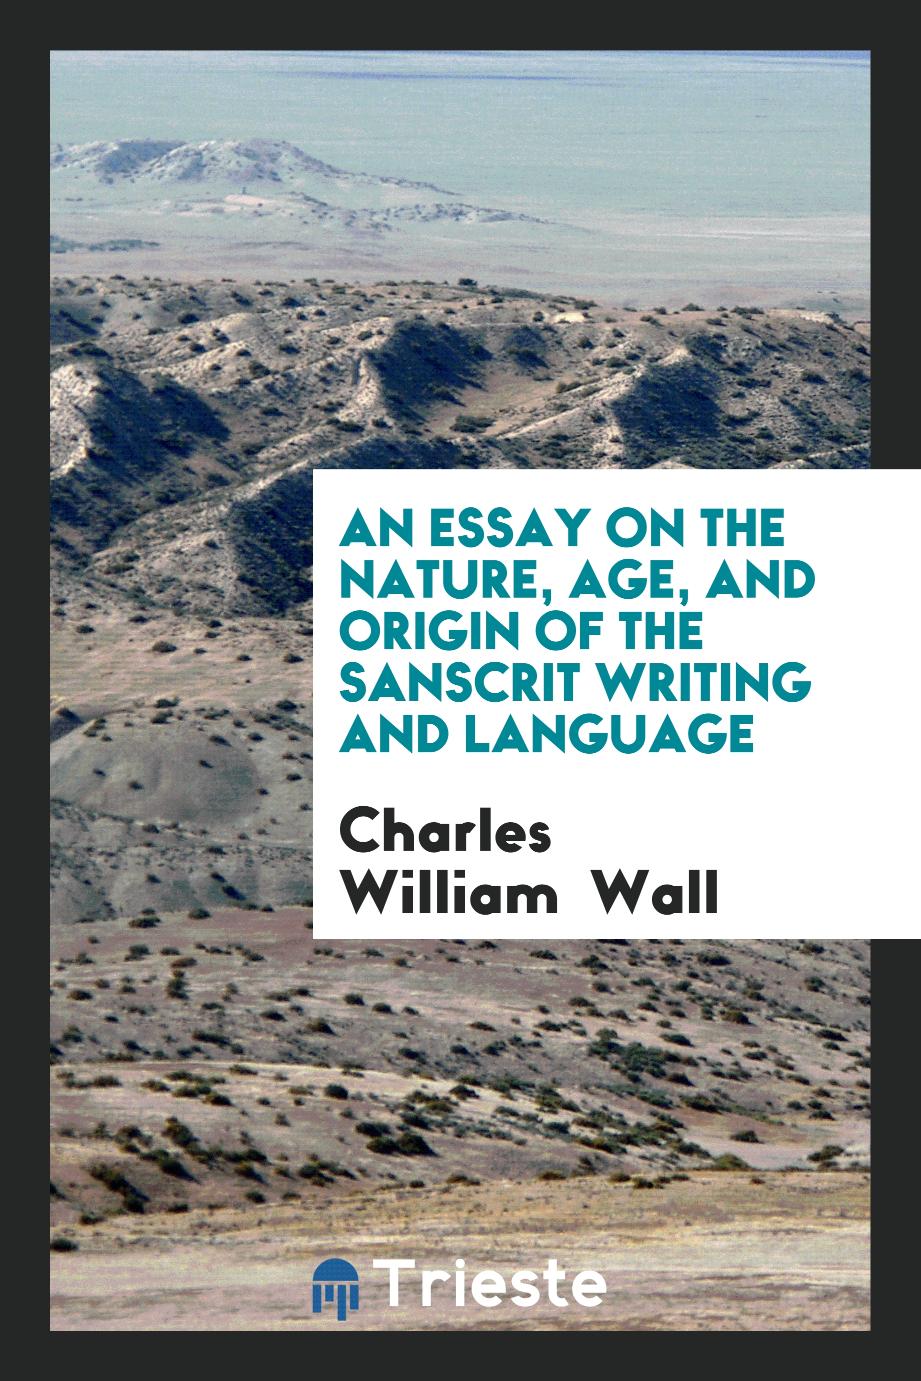 An essay on the nature, age, and origin of the Sanscrit writing and language